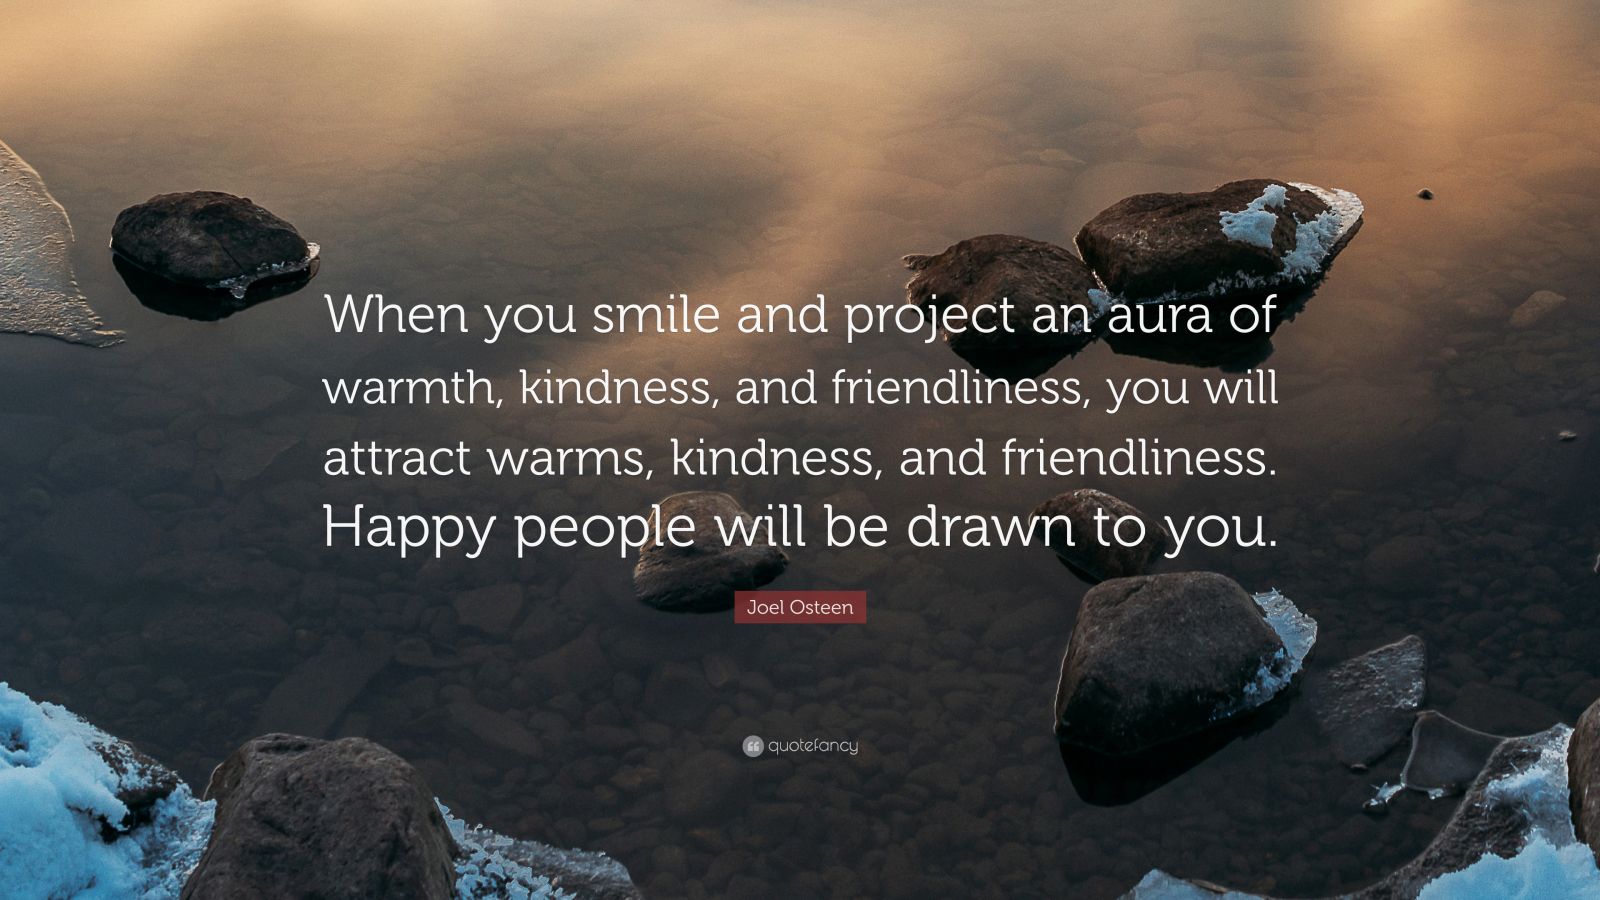 Joel Osteen Quote: “When you smile and project an aura of warmth ...